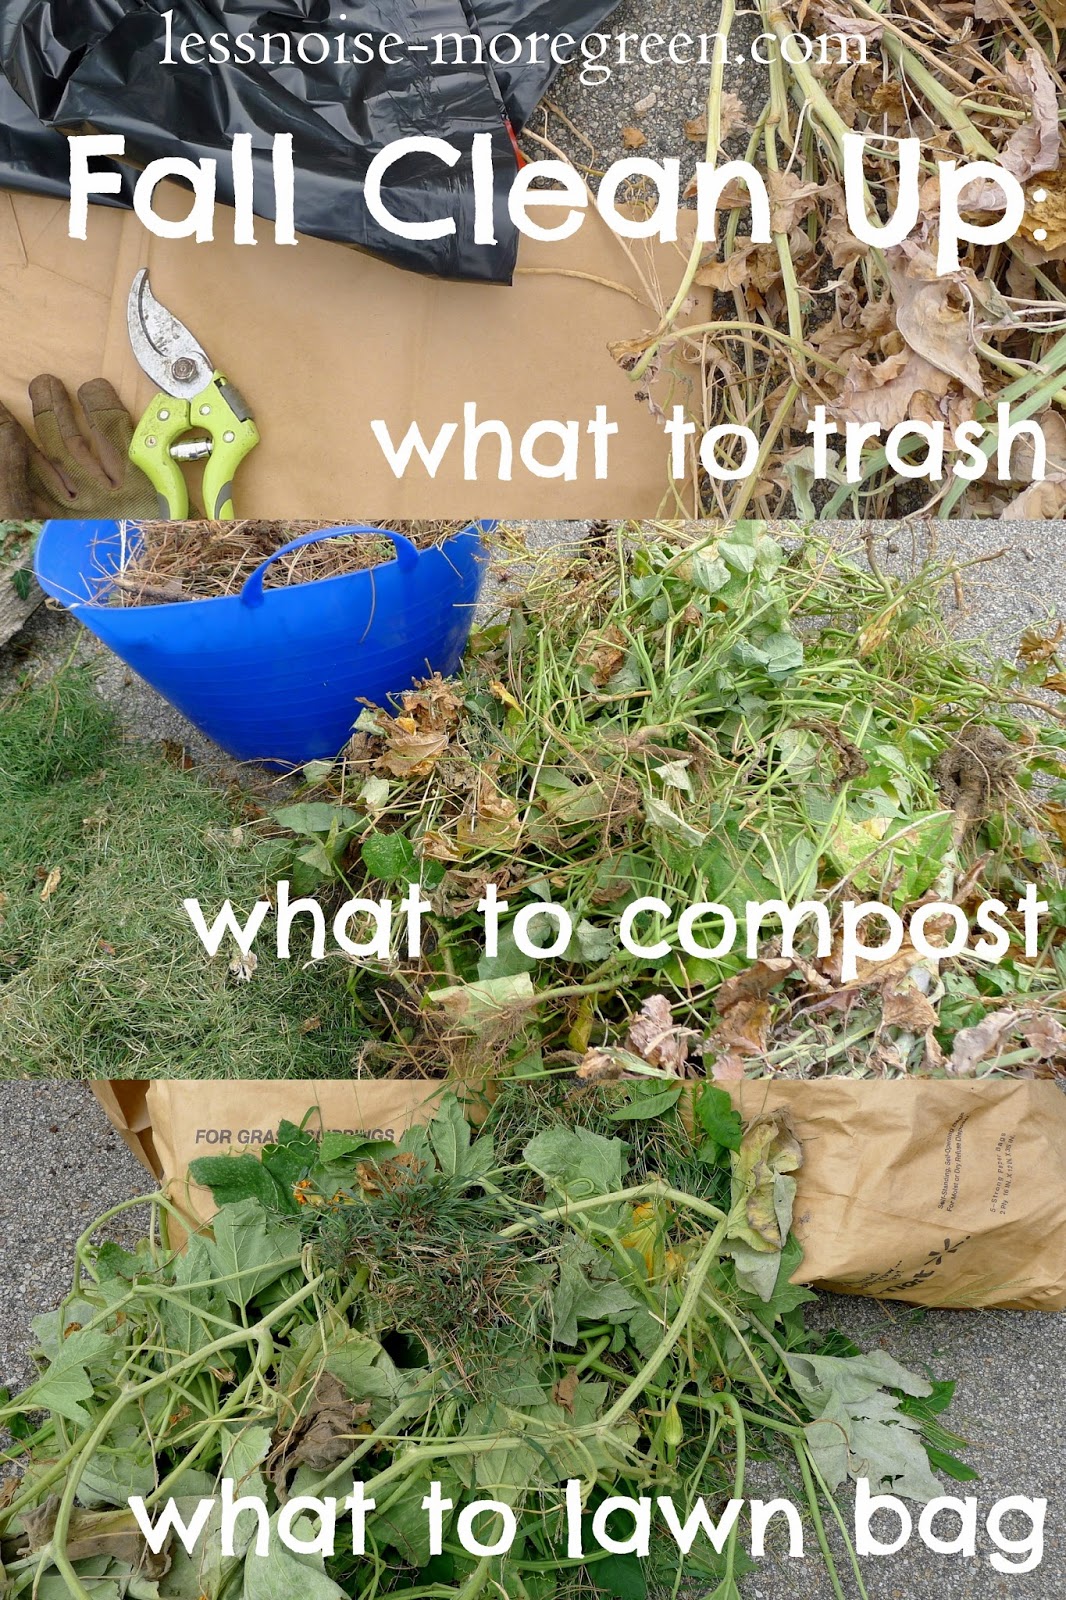 Fall Clean Up: what to compost, what to lawn bag and what to trash, urban farming, gardening